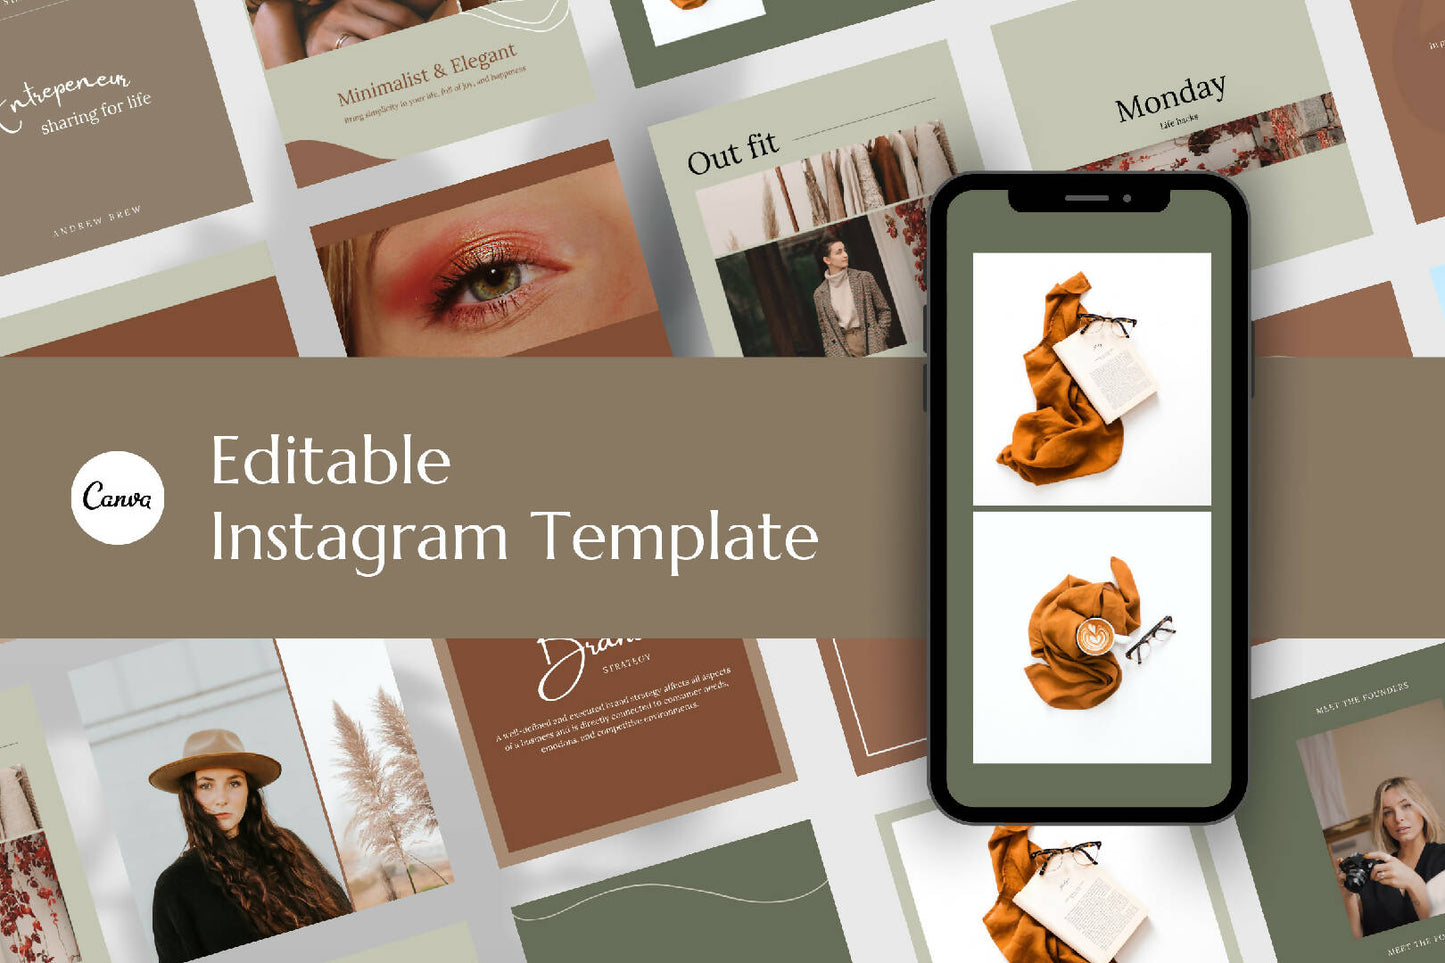 24 Business Templates for Social Media